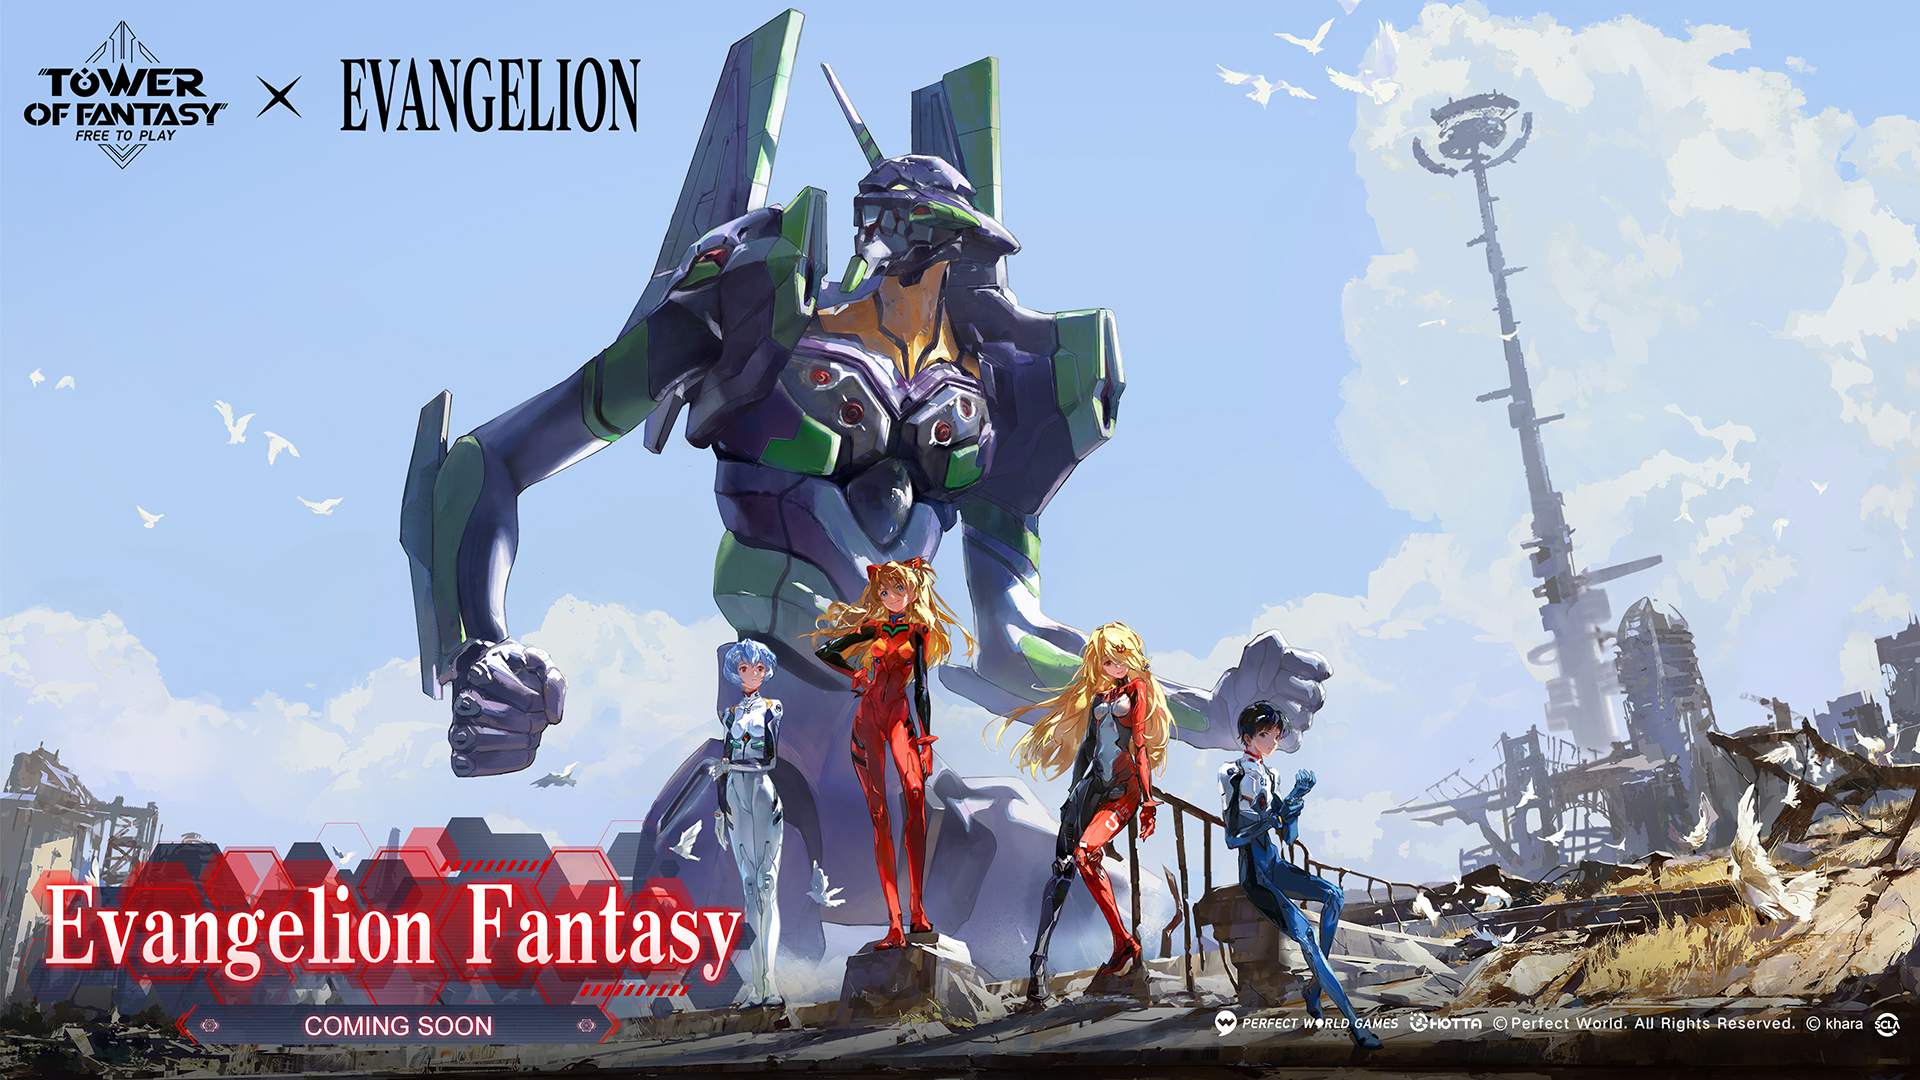 Tower of Fantasy Shares Gameplay From Evangelion Collab in Version 3.7